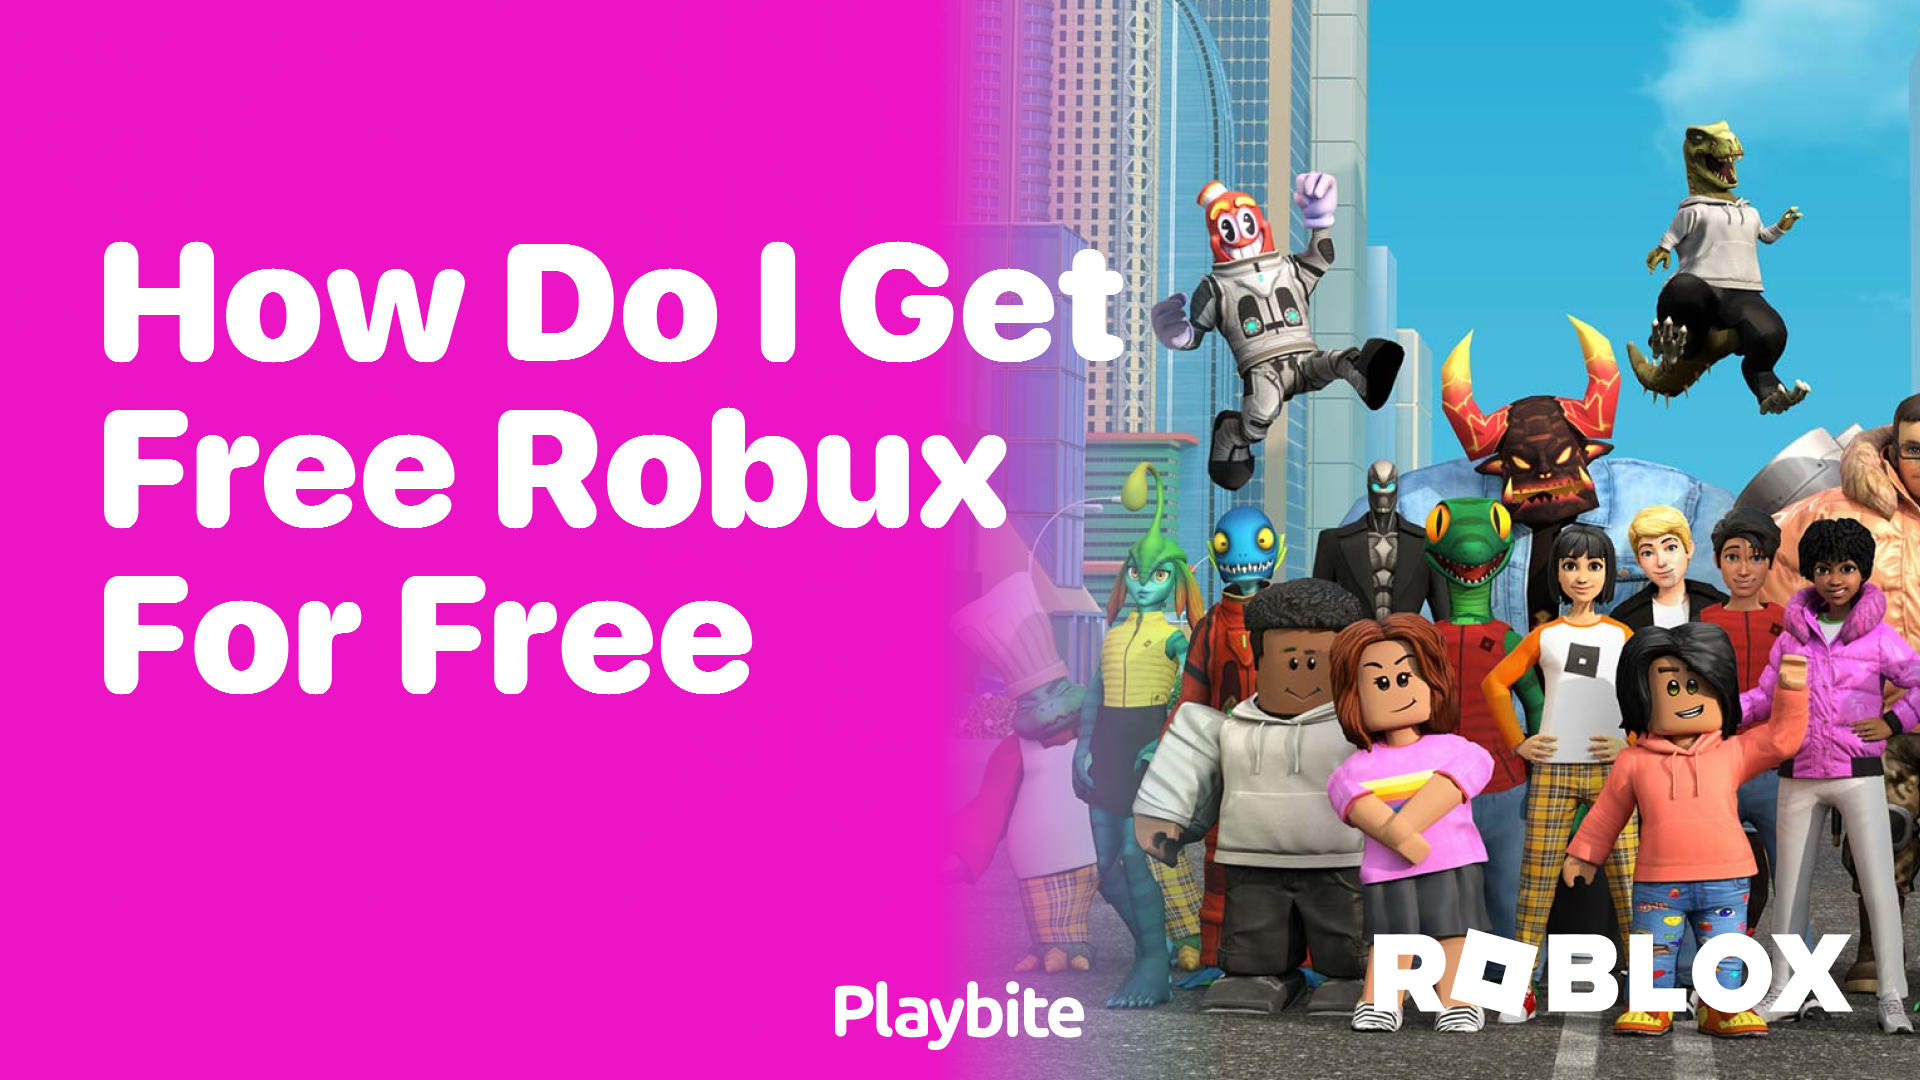 How Do I Get Free Robux for Free?